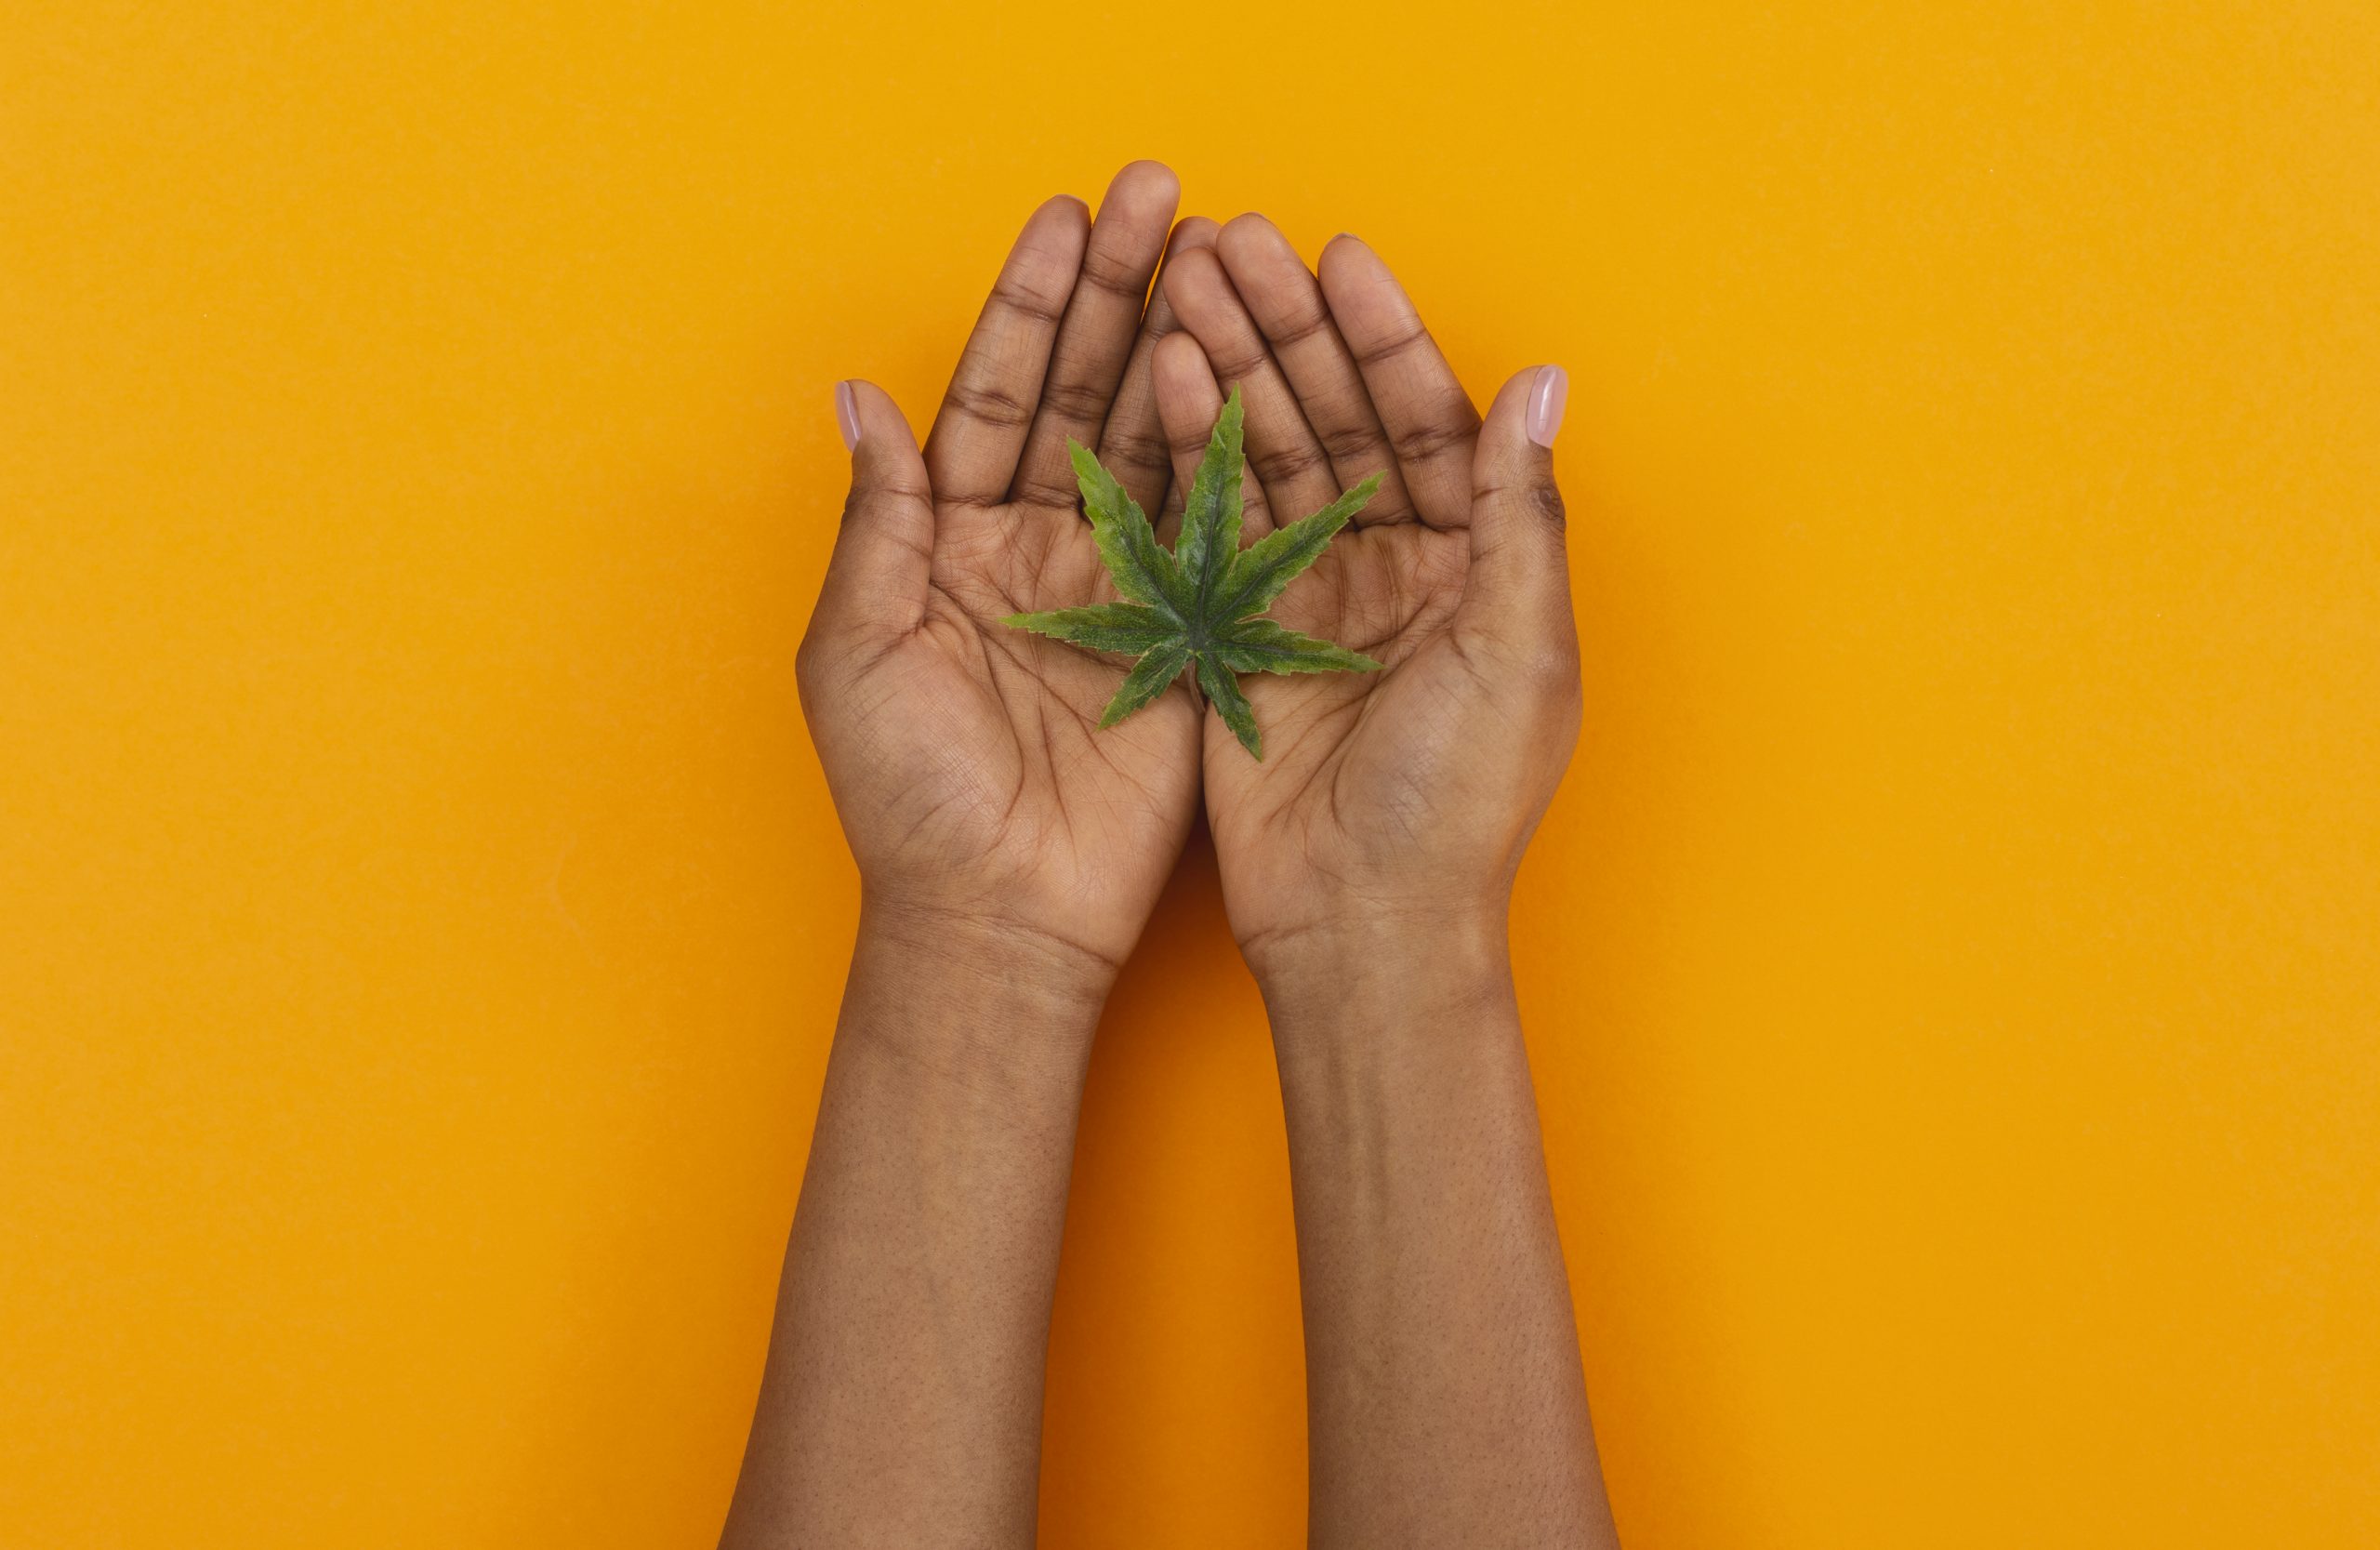 Black Women Are Taking Over The Cannabis Industry